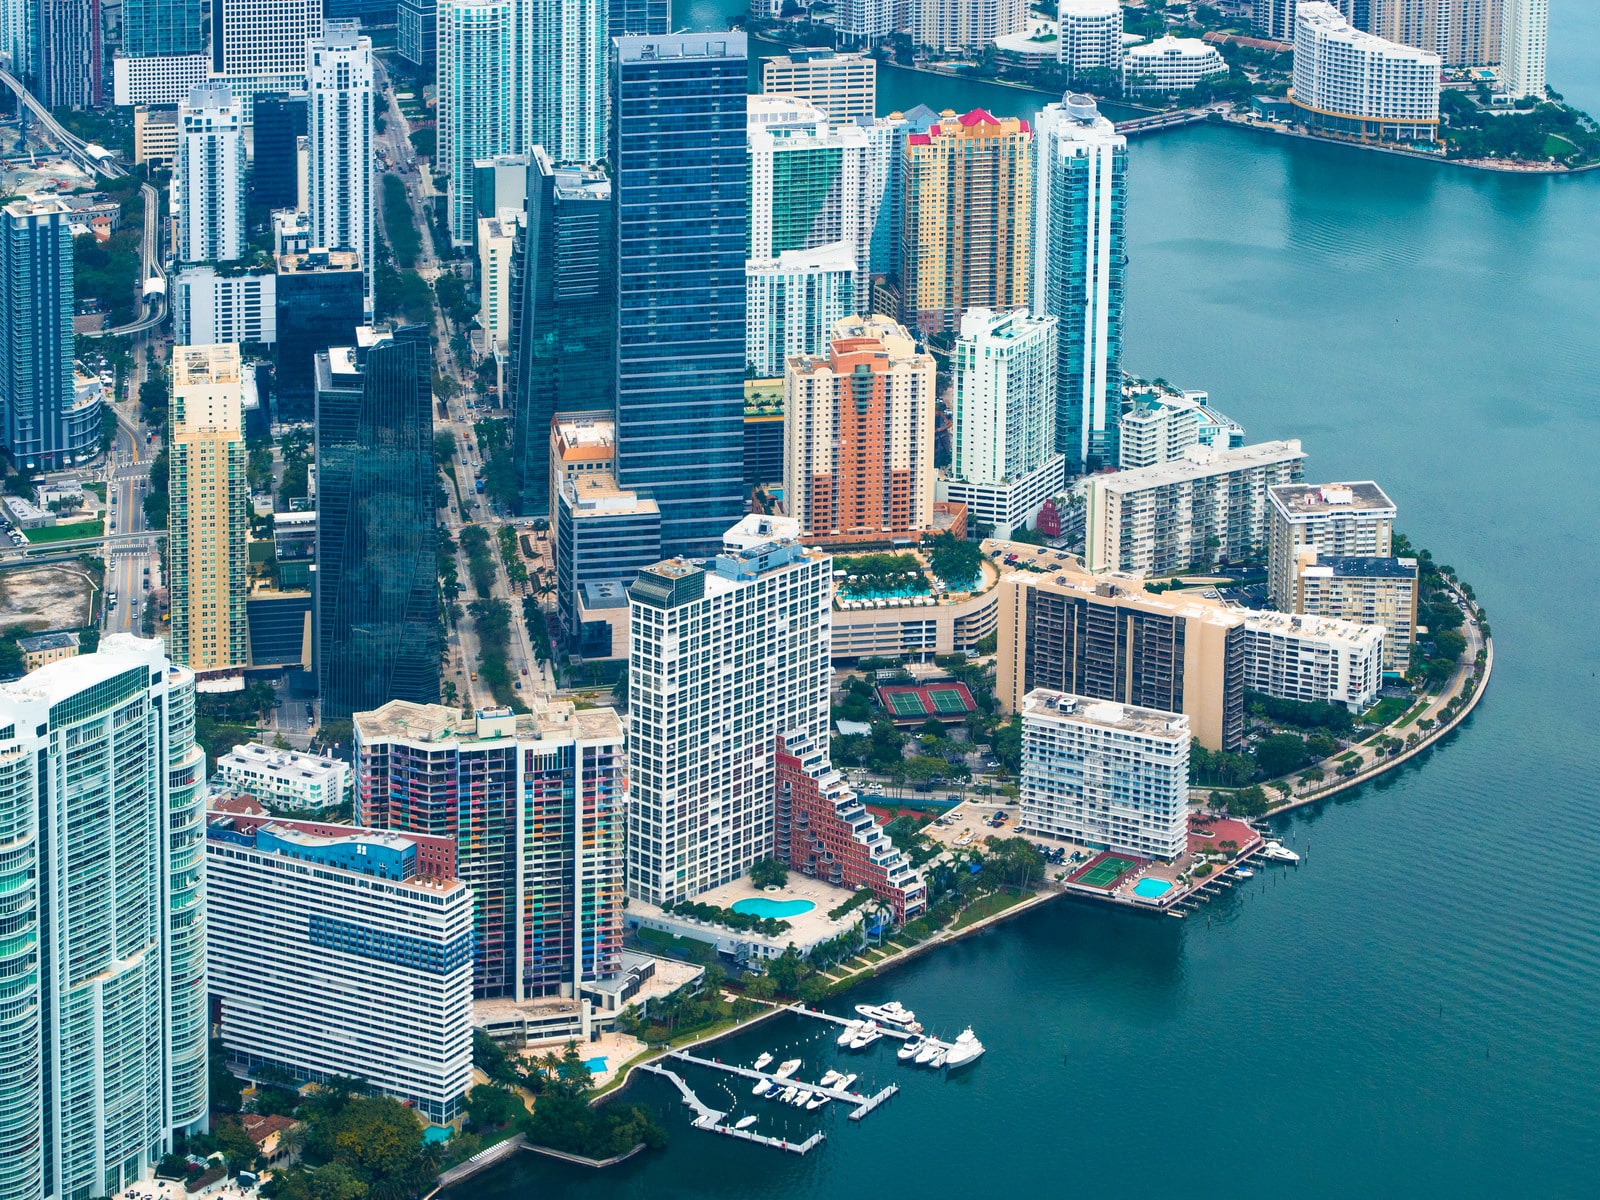 This image shows aerial view of Miami, Brickell buildings from a plane